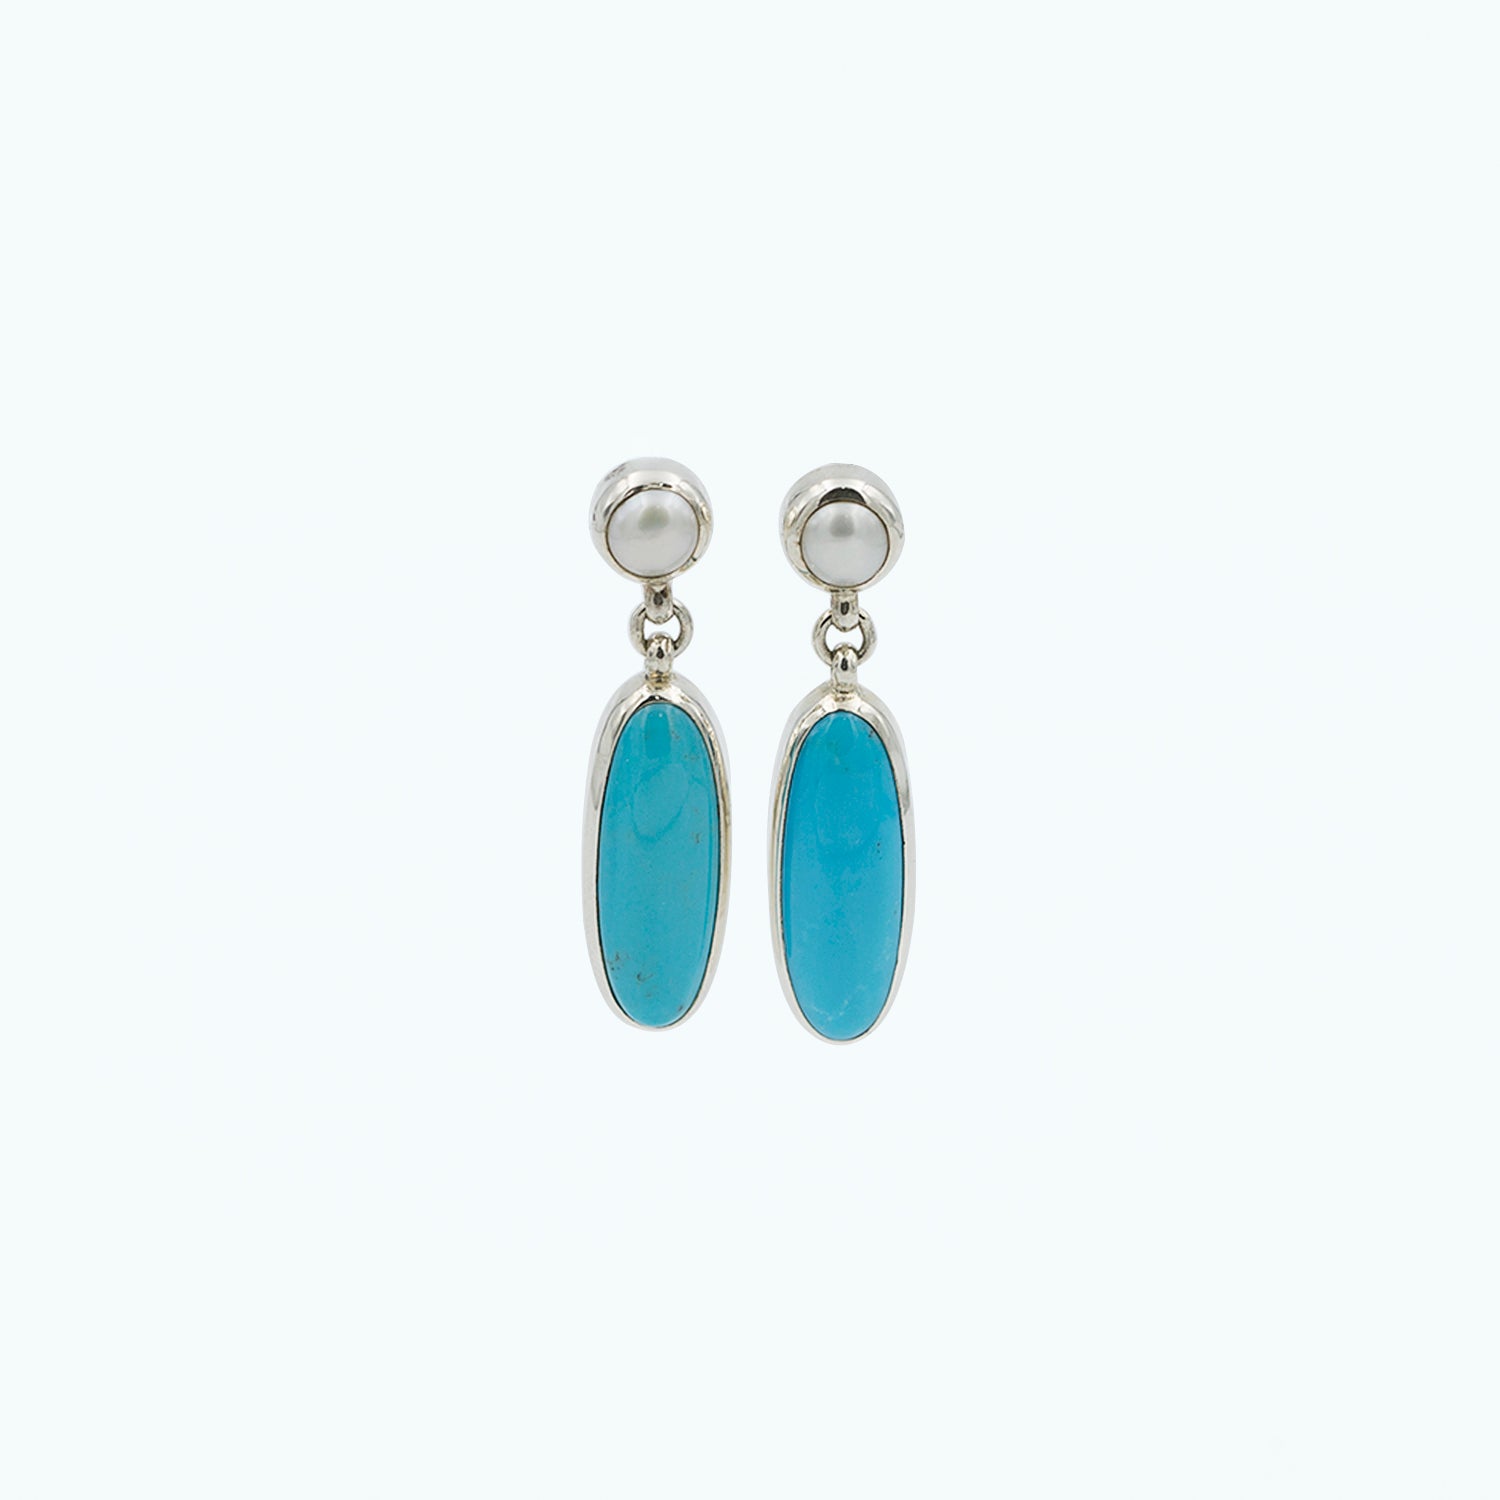 Miami Turquoise and Pearl Earring by Claudia Adegulo